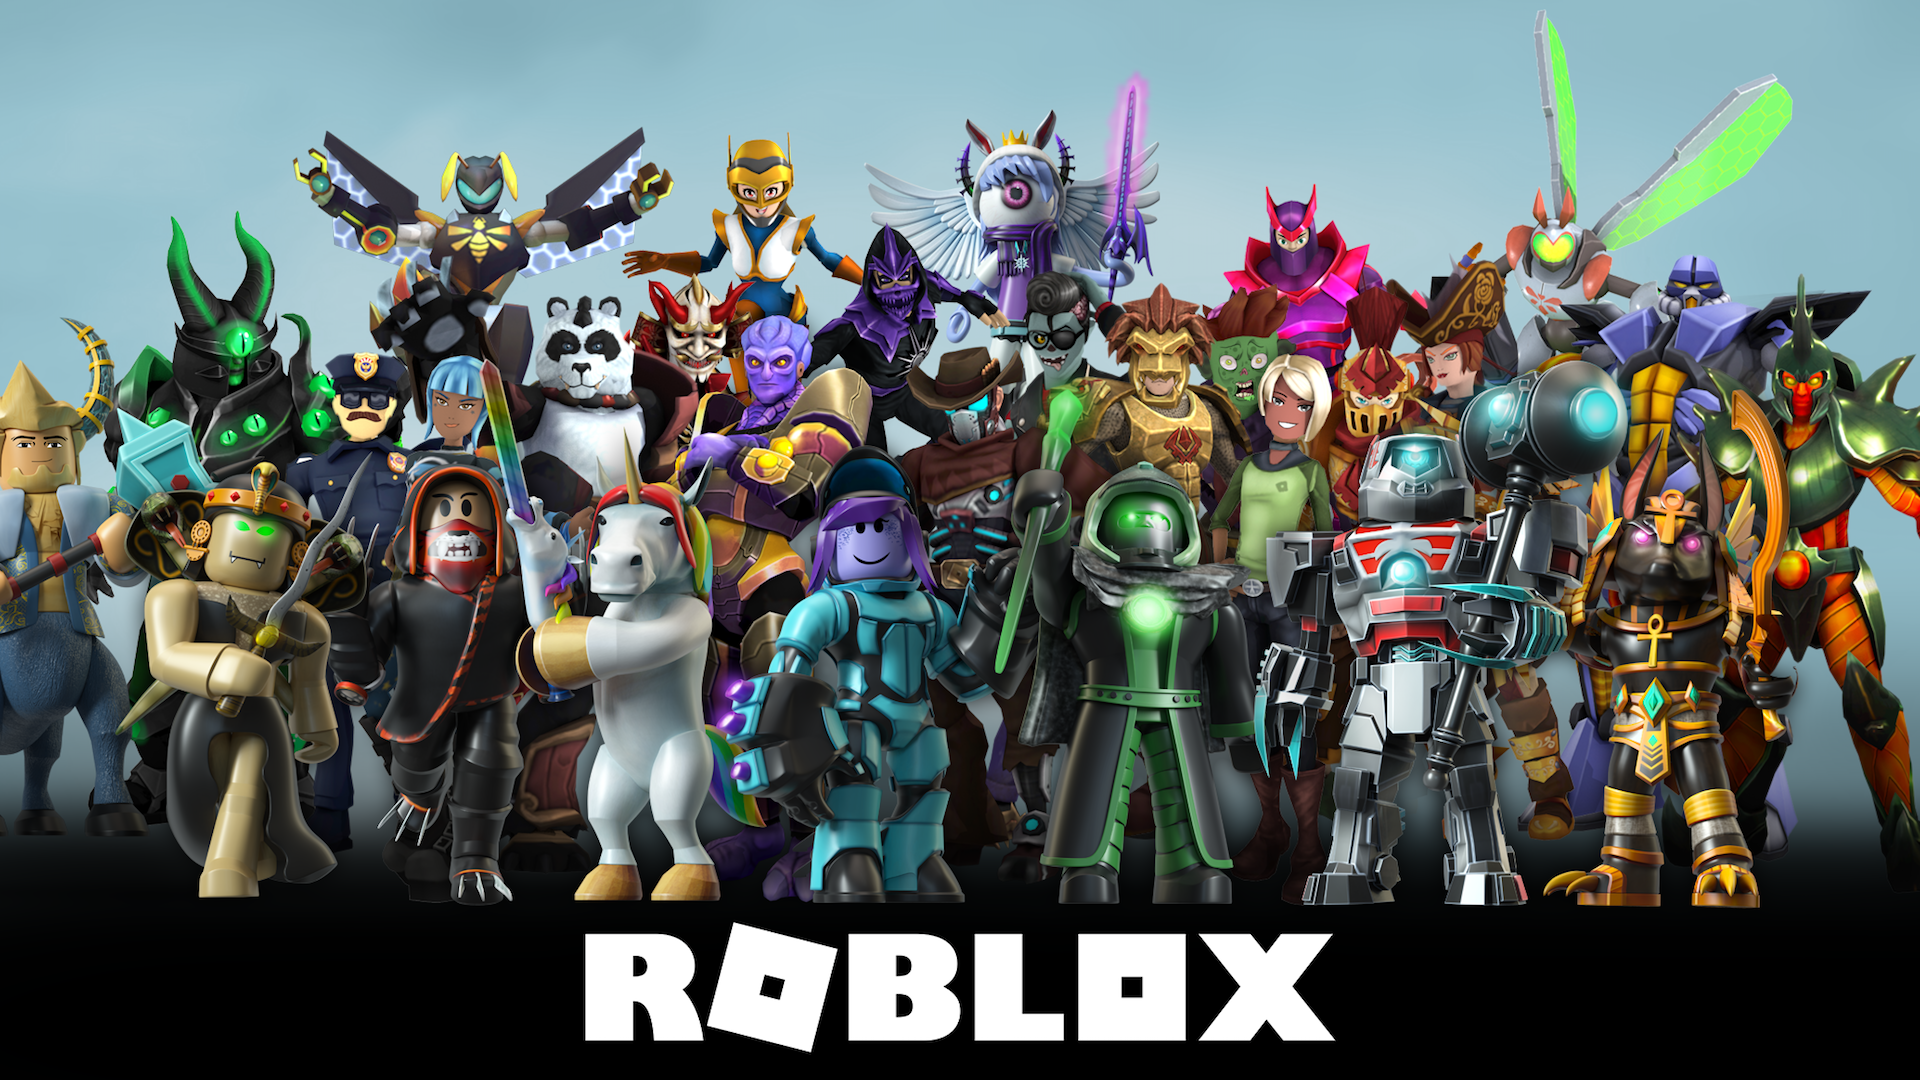 Roblox casts a wider net for gamers with optimized Chromebook app, Developer stories